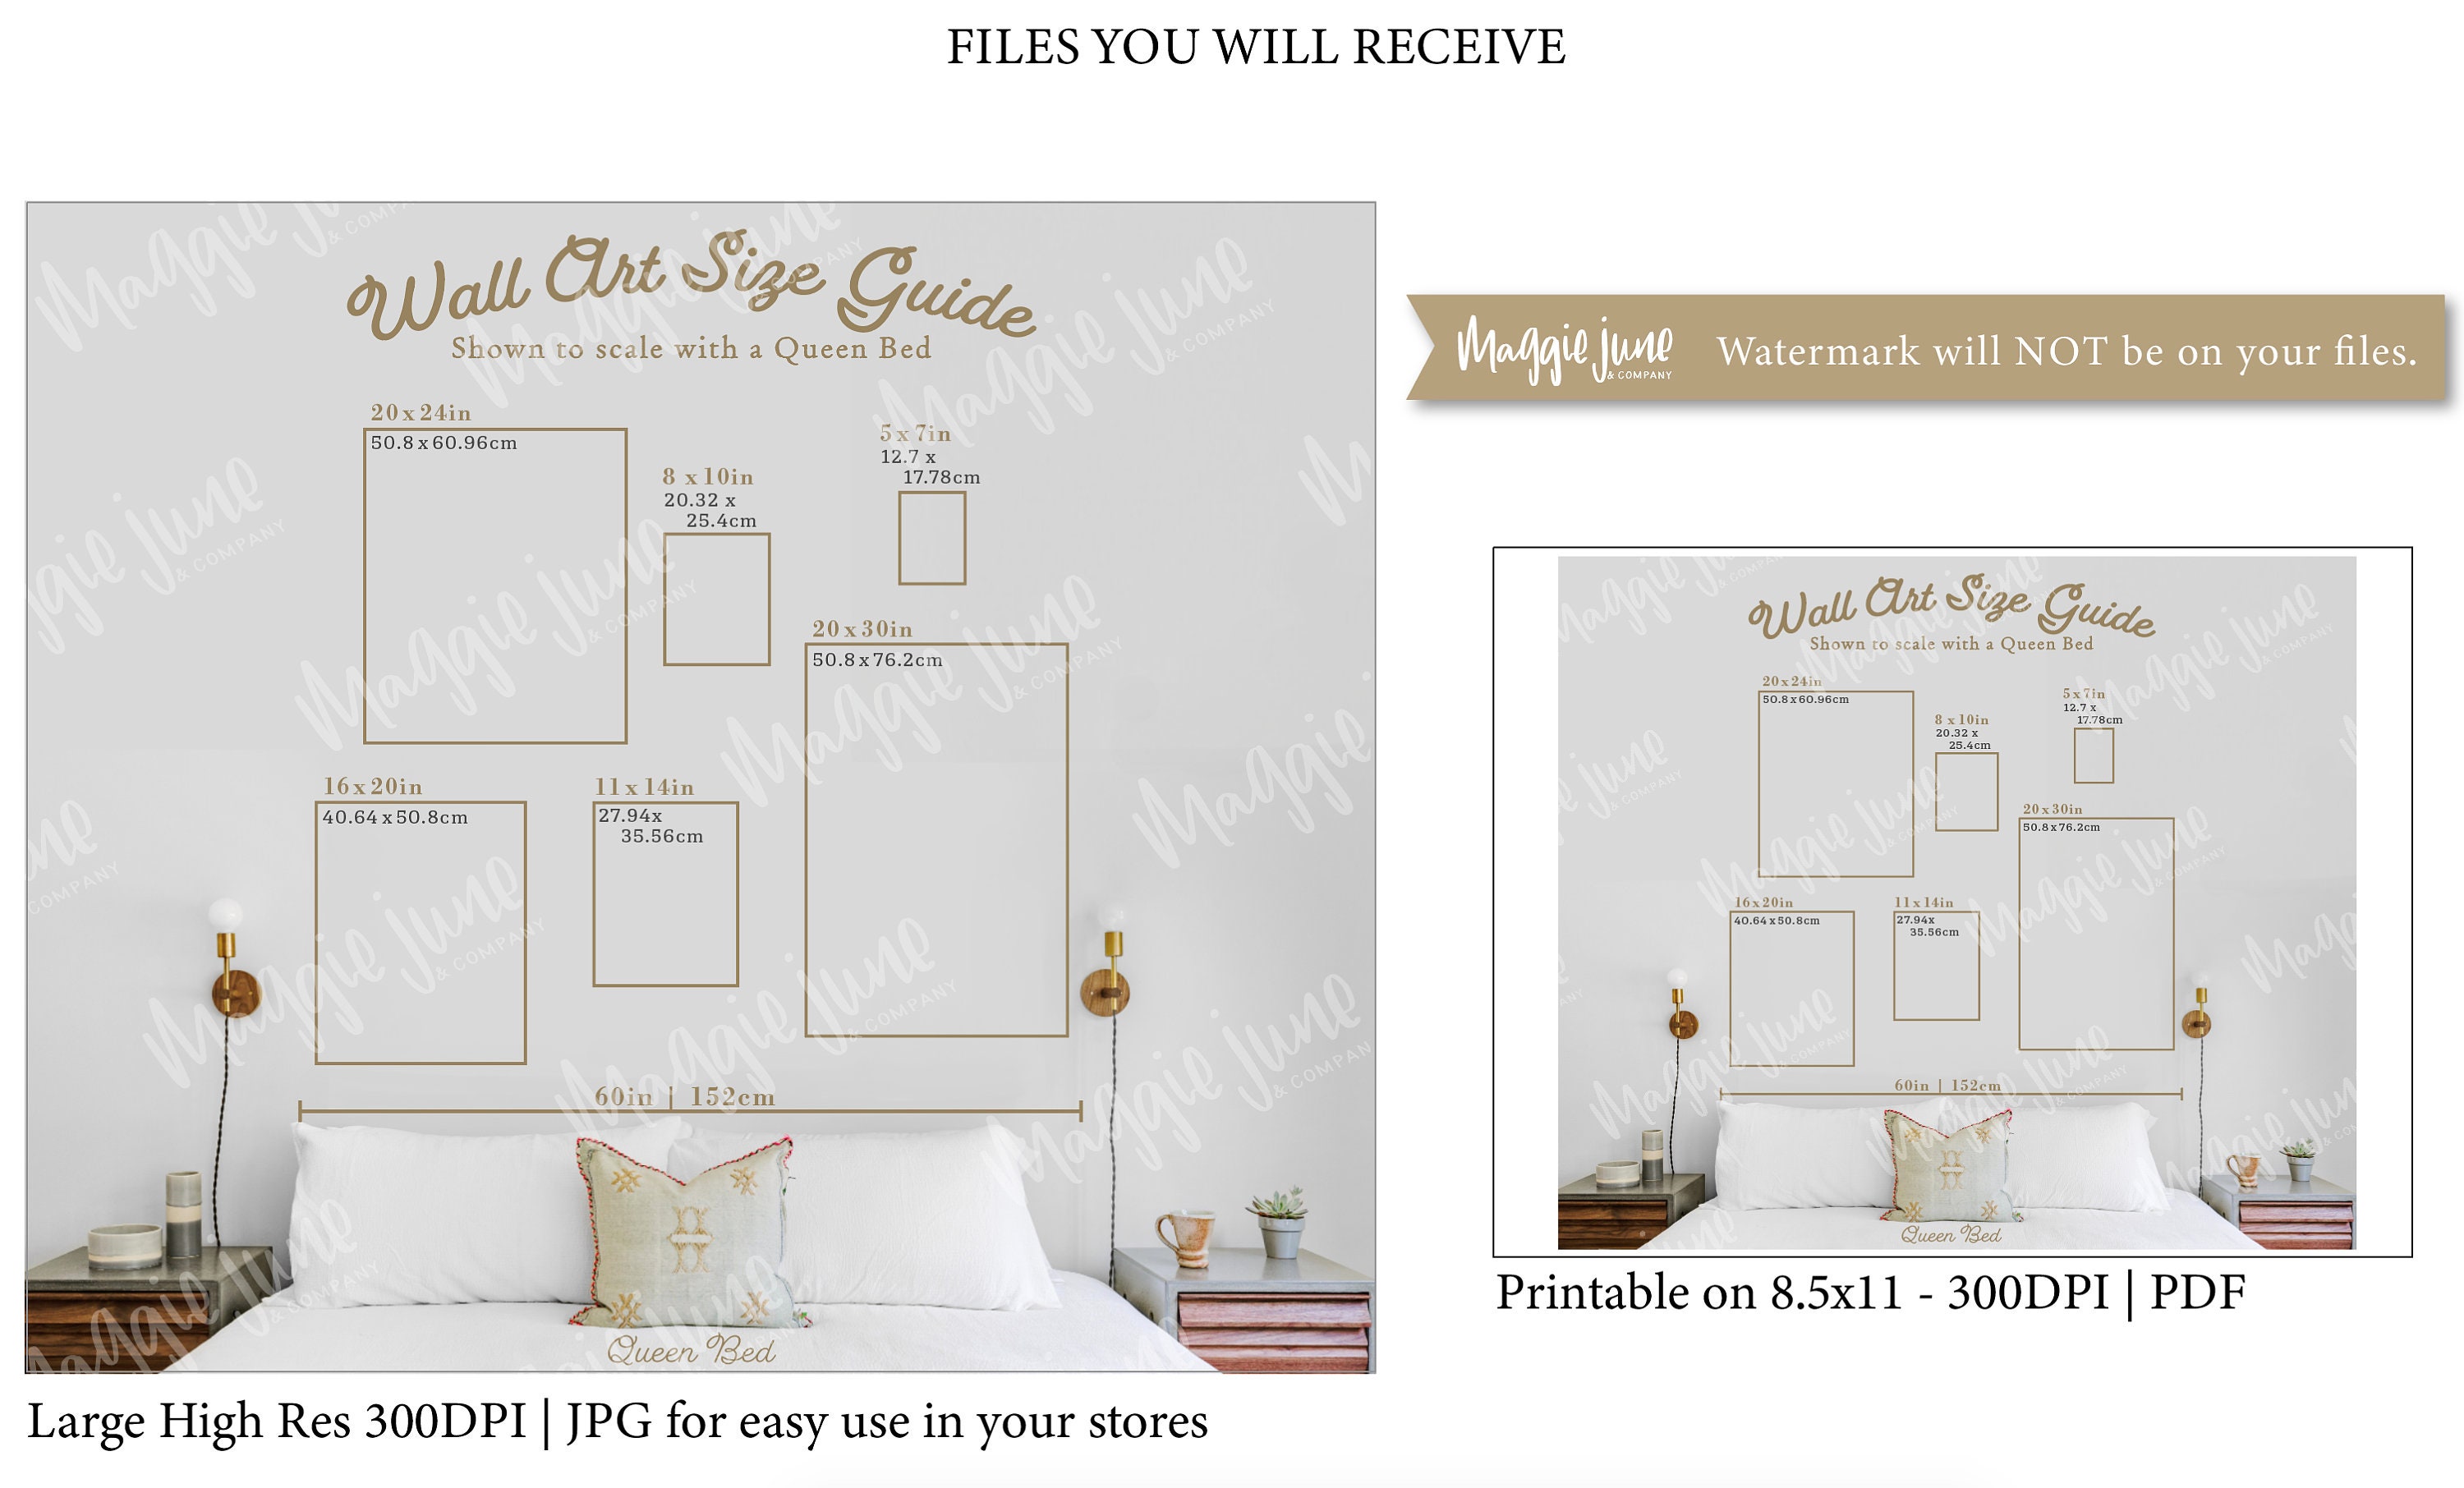 Most Popular Sizes Wall art size guide, Printable & Downloadable image size  guide for print sellers- Clear N Easy to make sense of them all!